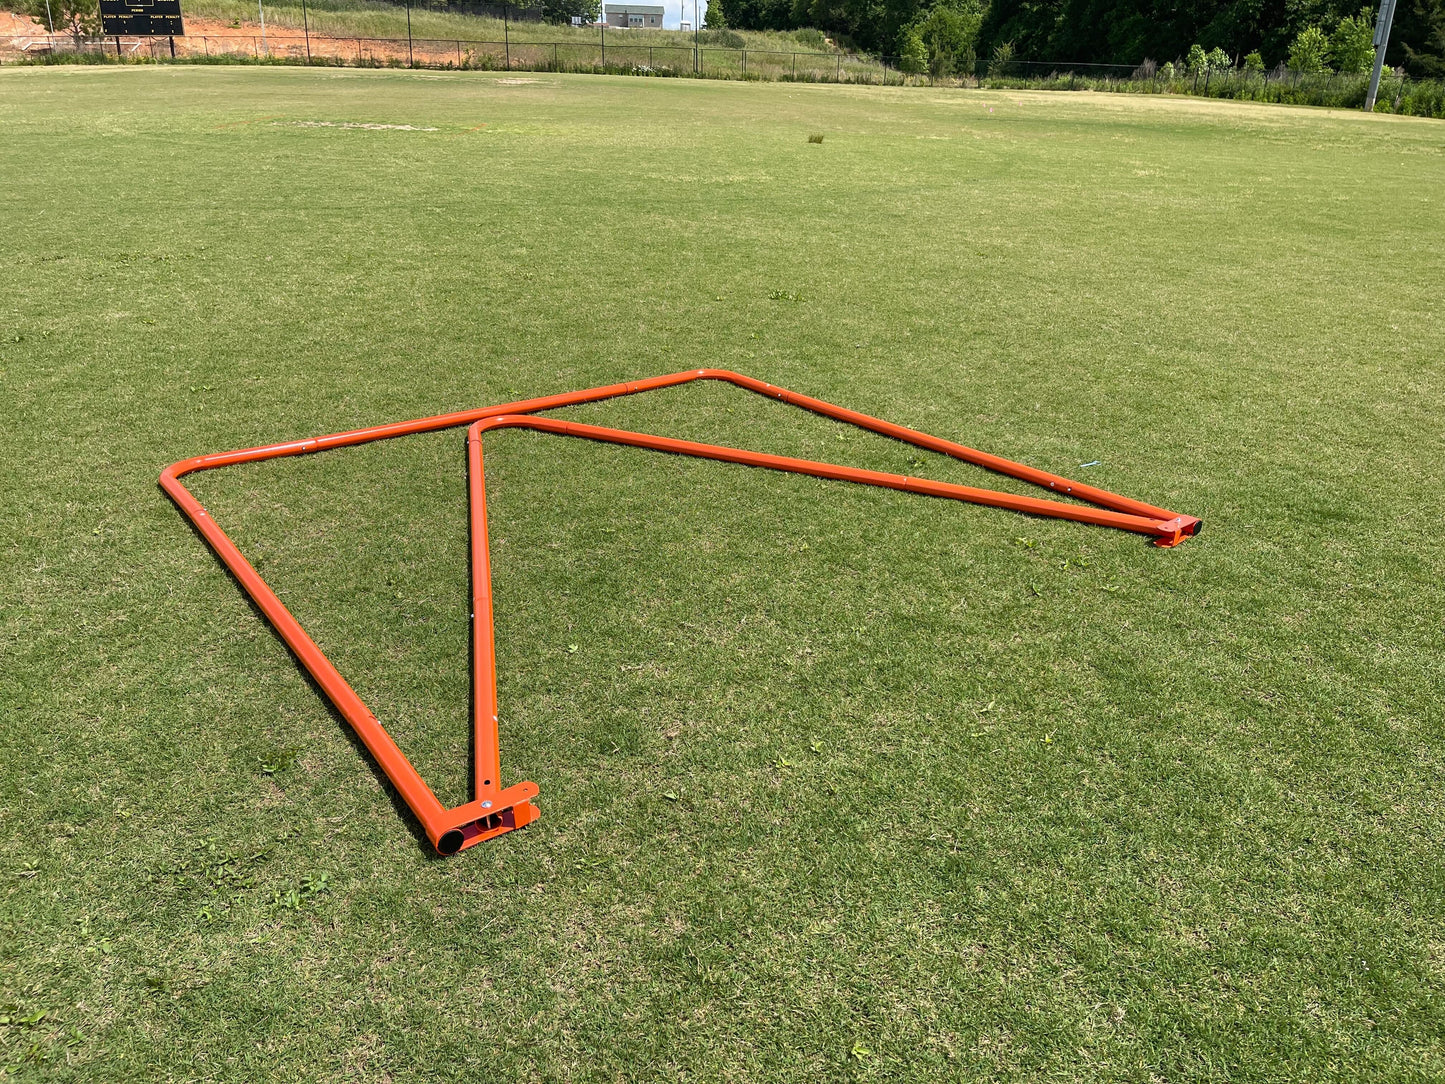 Folding Lacrosse Goal - 30 lbs, 6'x6'x7' by Crankshooter® Included w/ 4mm, 5mm or 6mm White Net - FREE Shipping.